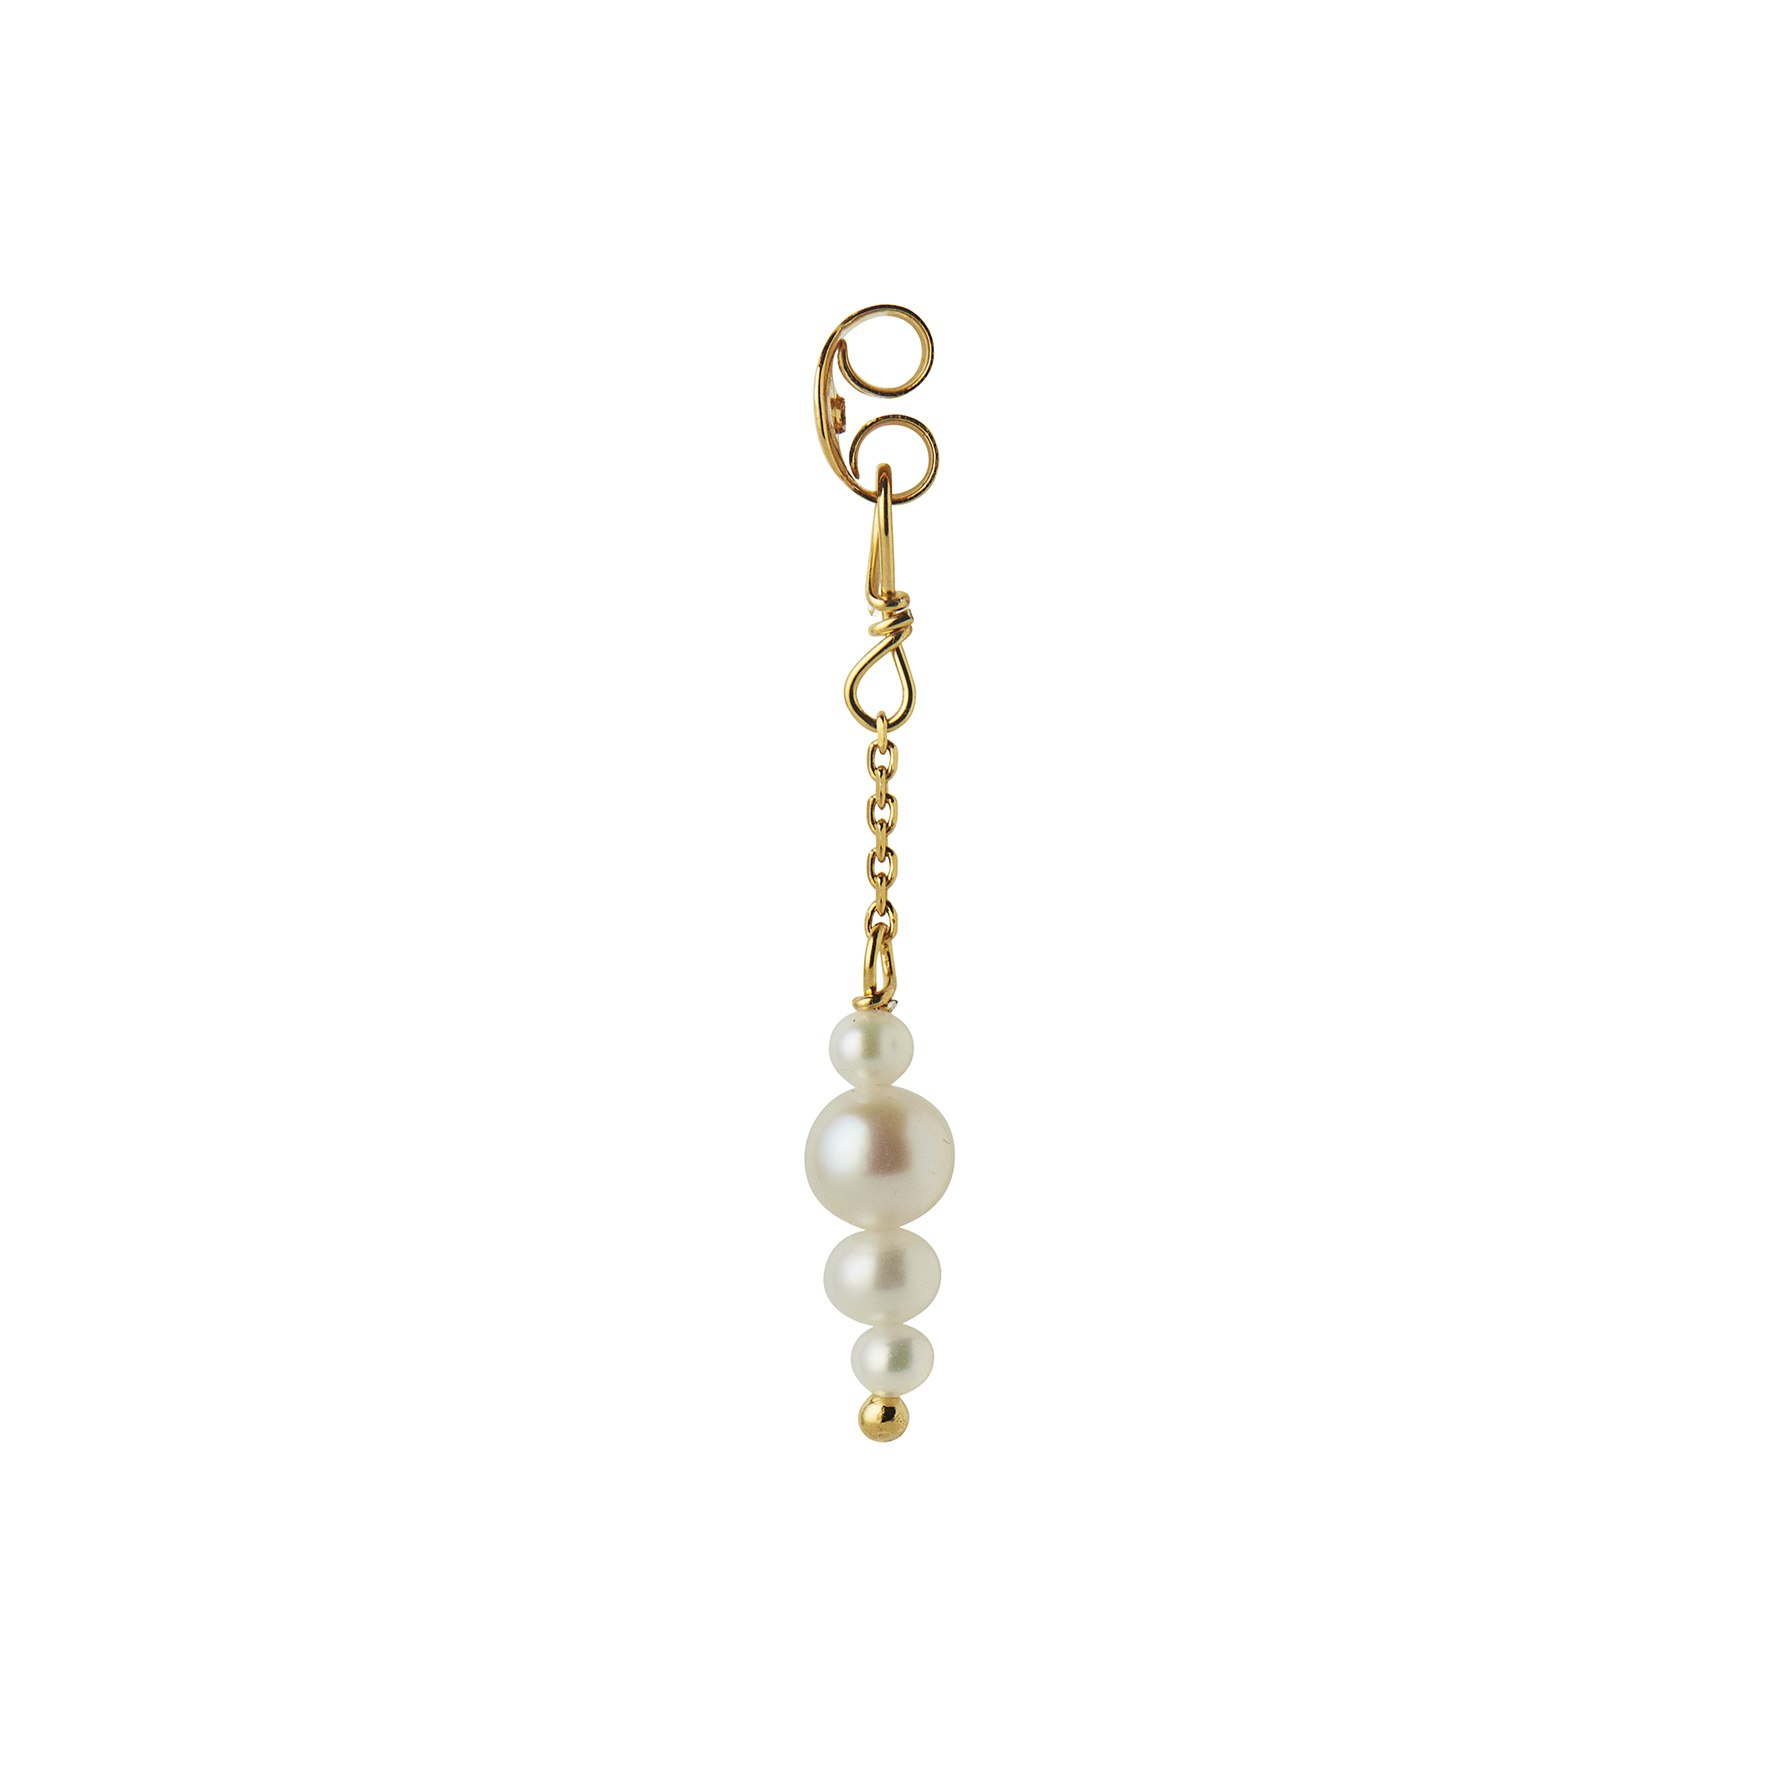 Petit Pearl Berries Behind Ear Earring fra STINE A Jewelry i Forgylt-Sølv Sterling 925